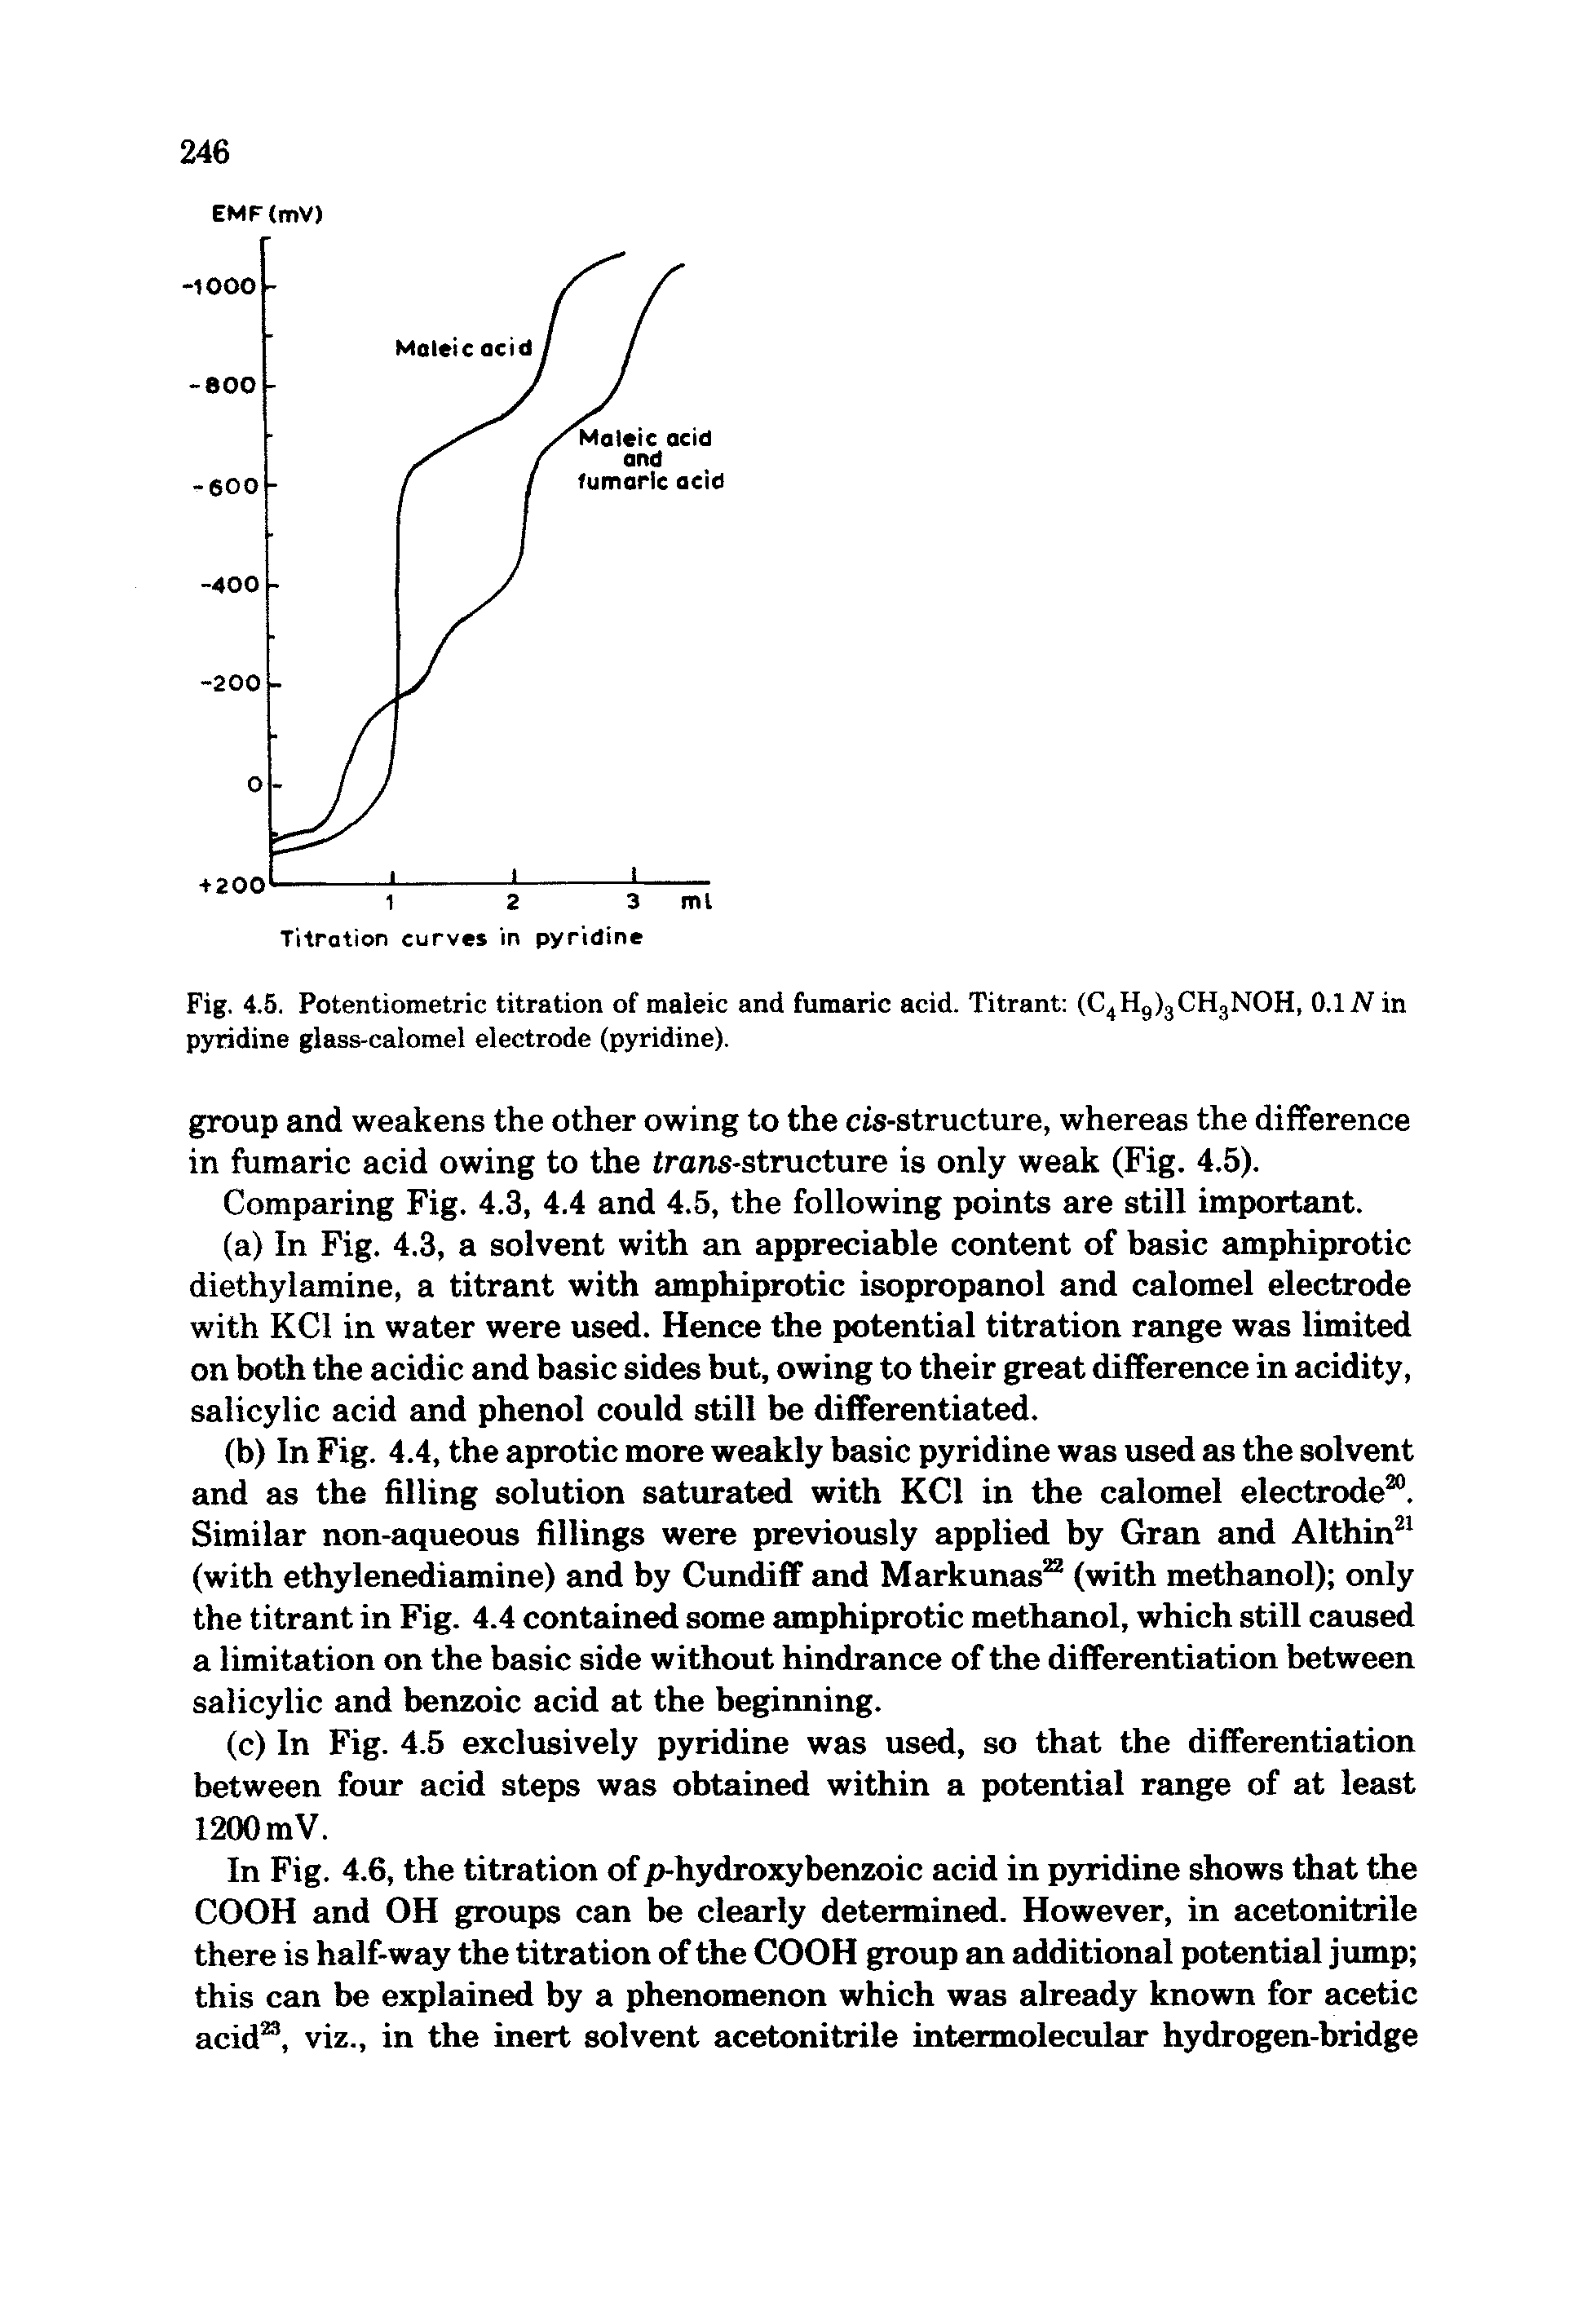 Fig. 4.5. Potentiometric titration of maleic and fumaric acid. Titrant (C4H9)3CH3NOH, 0.1 N in pyridine glass-calomel electrode (pyridine).